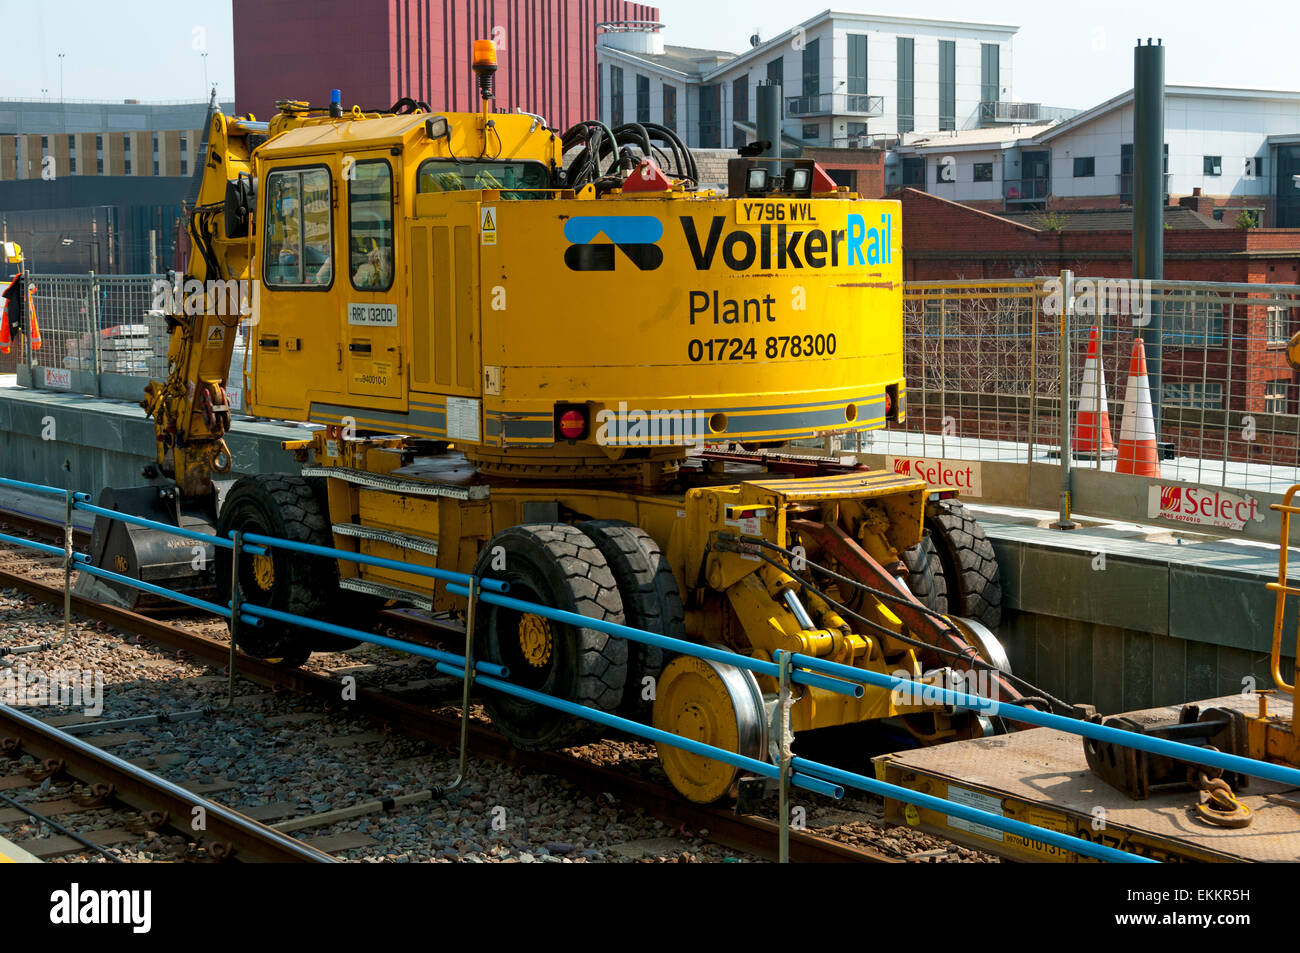 Volker Rail road-rail vehicle type RRC13200 at the Deansgate-Castlefield Metrolink tram stop, Manchester, England, UK Stock Photo